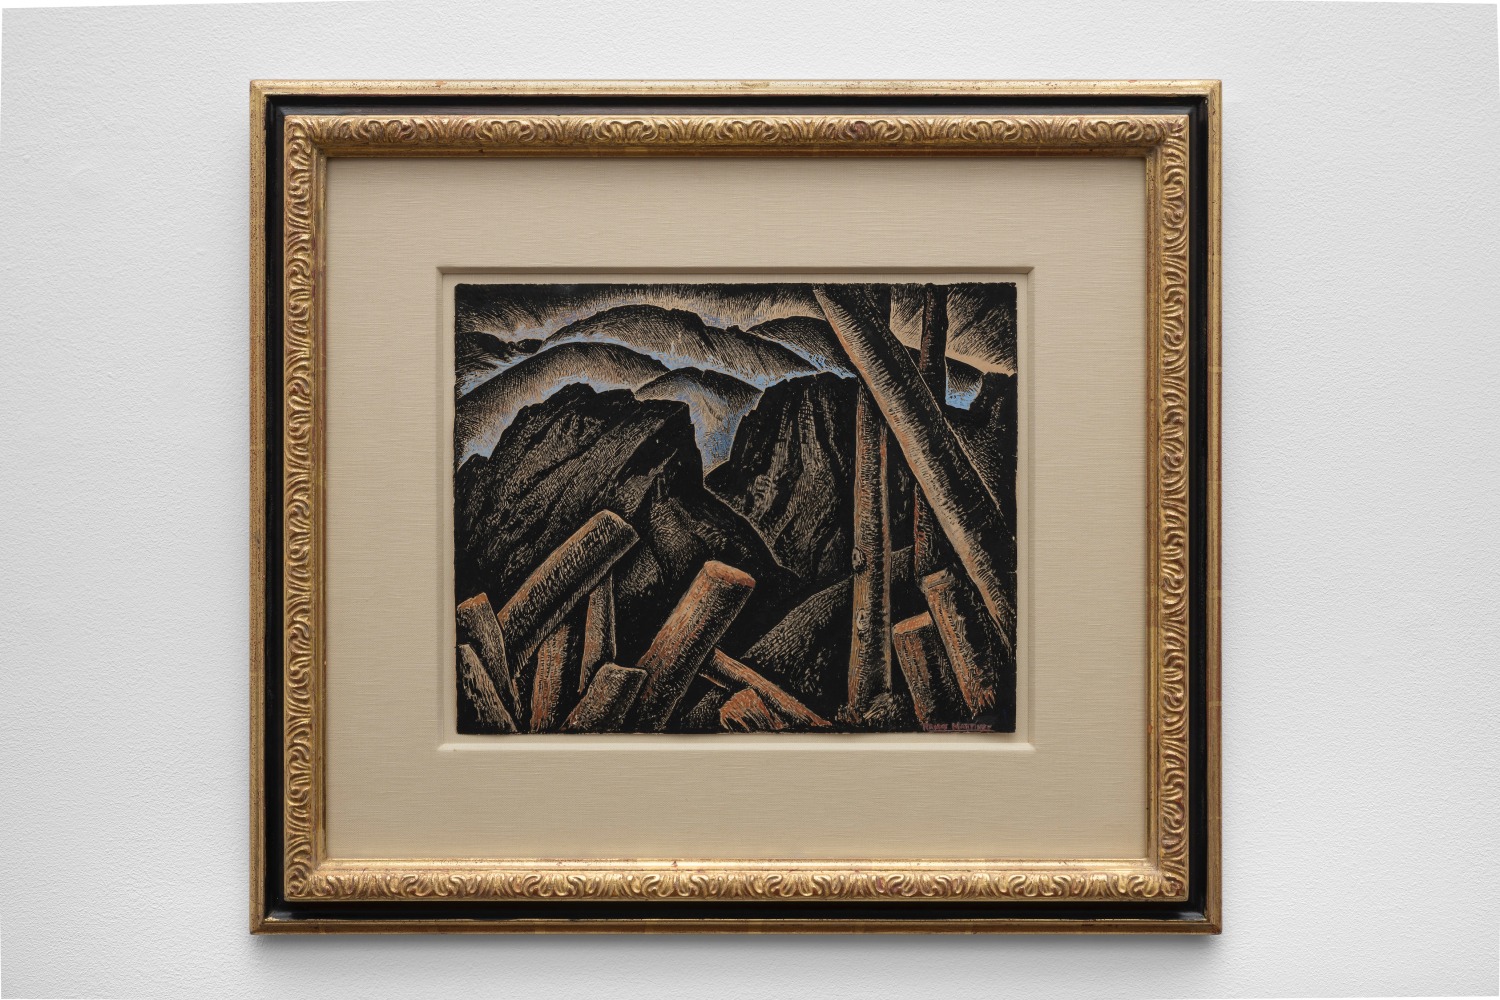 Alfredo Ramos Martinez (1871-1946) After the Storm, c. 1934 tempera on paper 11 1/2 x 14 5/8 inches; 29.2 x 37.1 centimeters LSFA# 13360